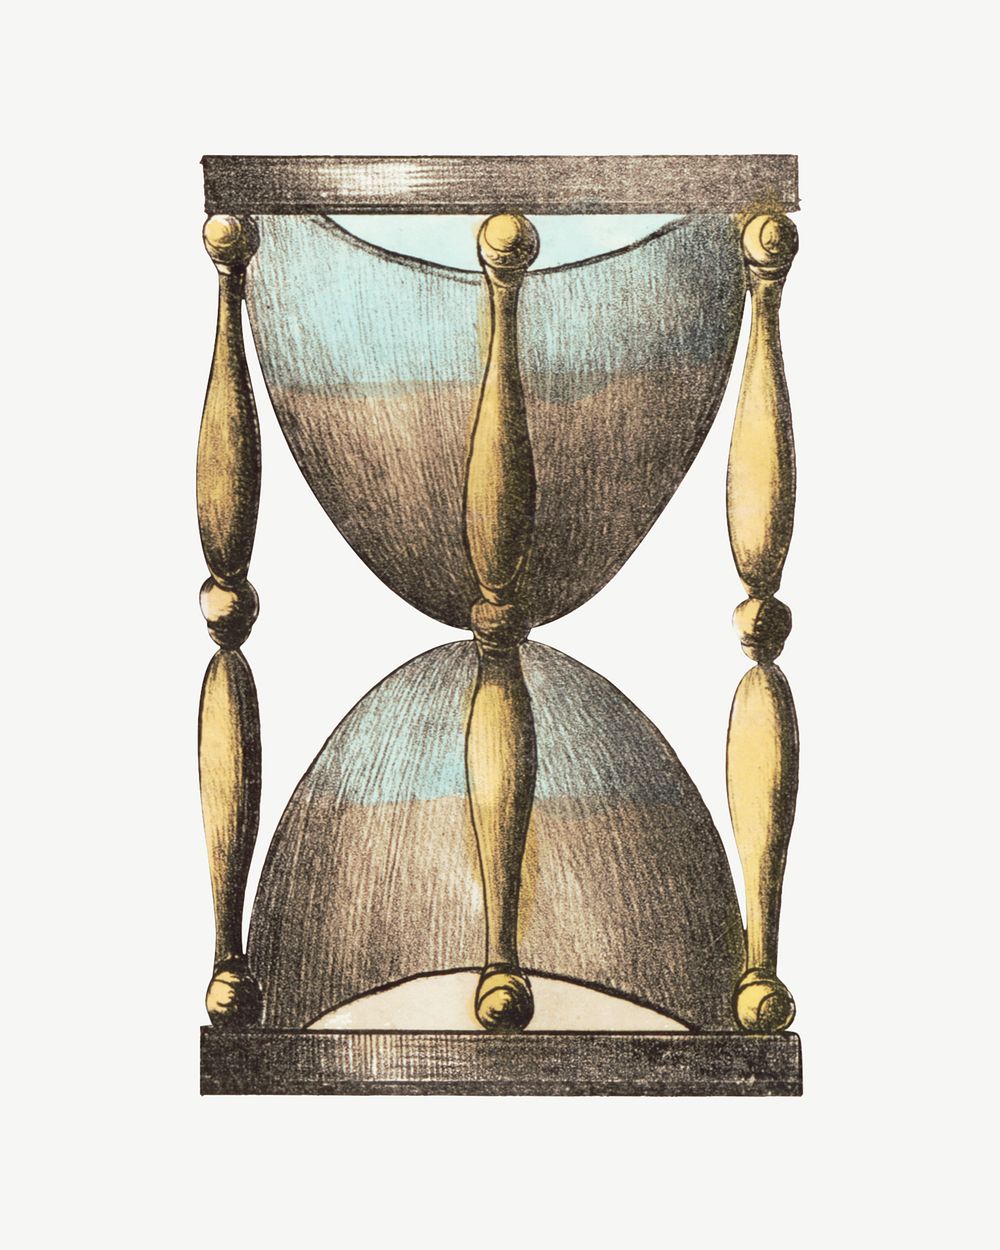 Hourglass, vintage object illustration psd. Remixed by rawpixel.